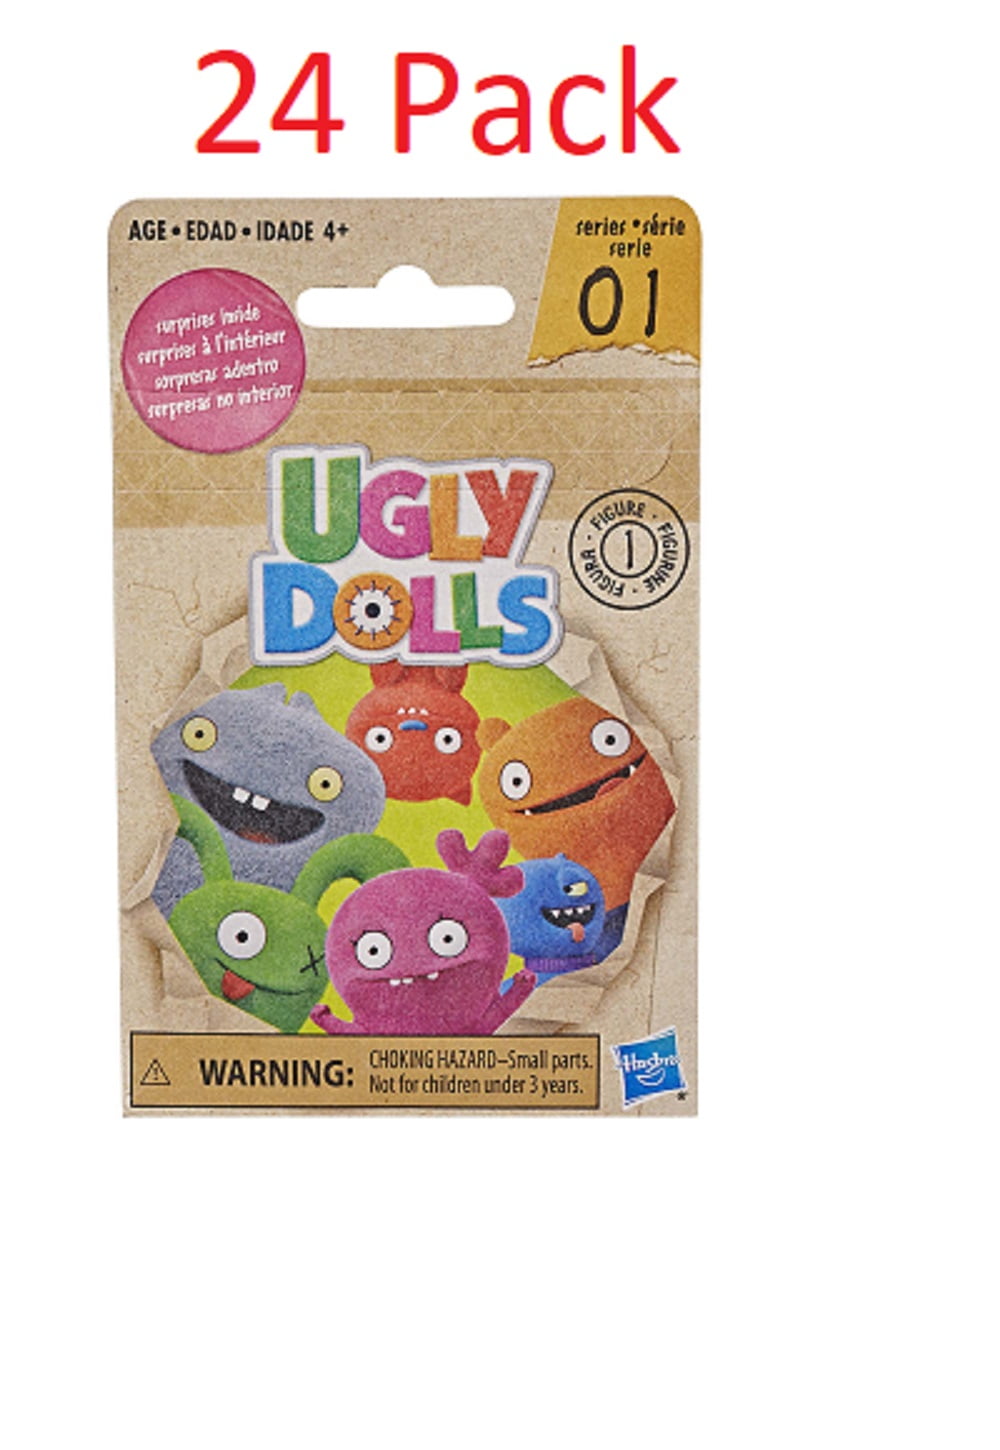 LIMITED EDITION SOLD OUT EXCLUSIVE! UglyDolls "OX" MINI ARTIST SERIES Hasbro 